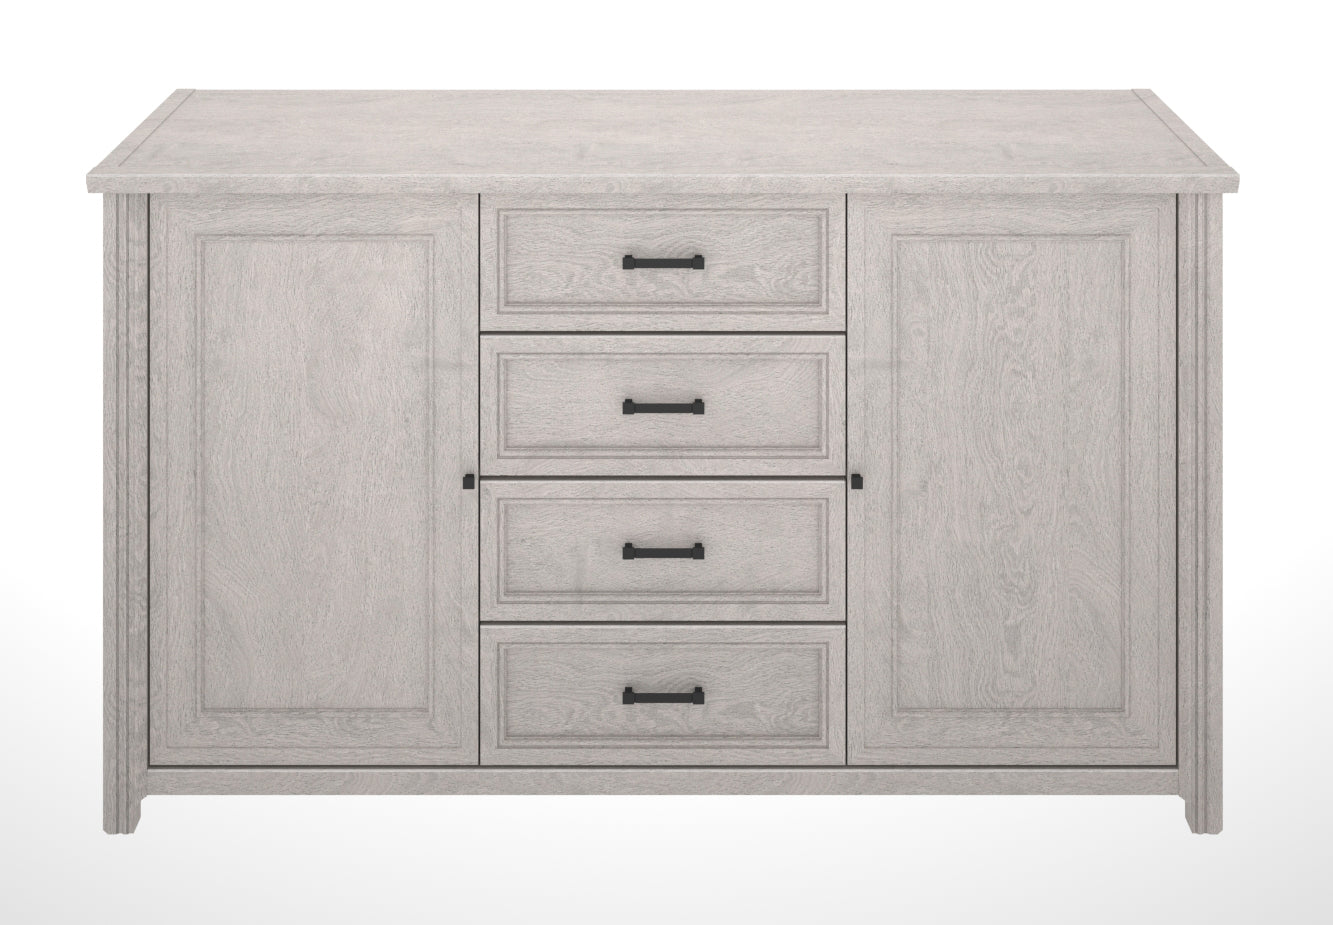 Sideboard 2 doors / 4 drawers imitation bleached oak, French manufacture